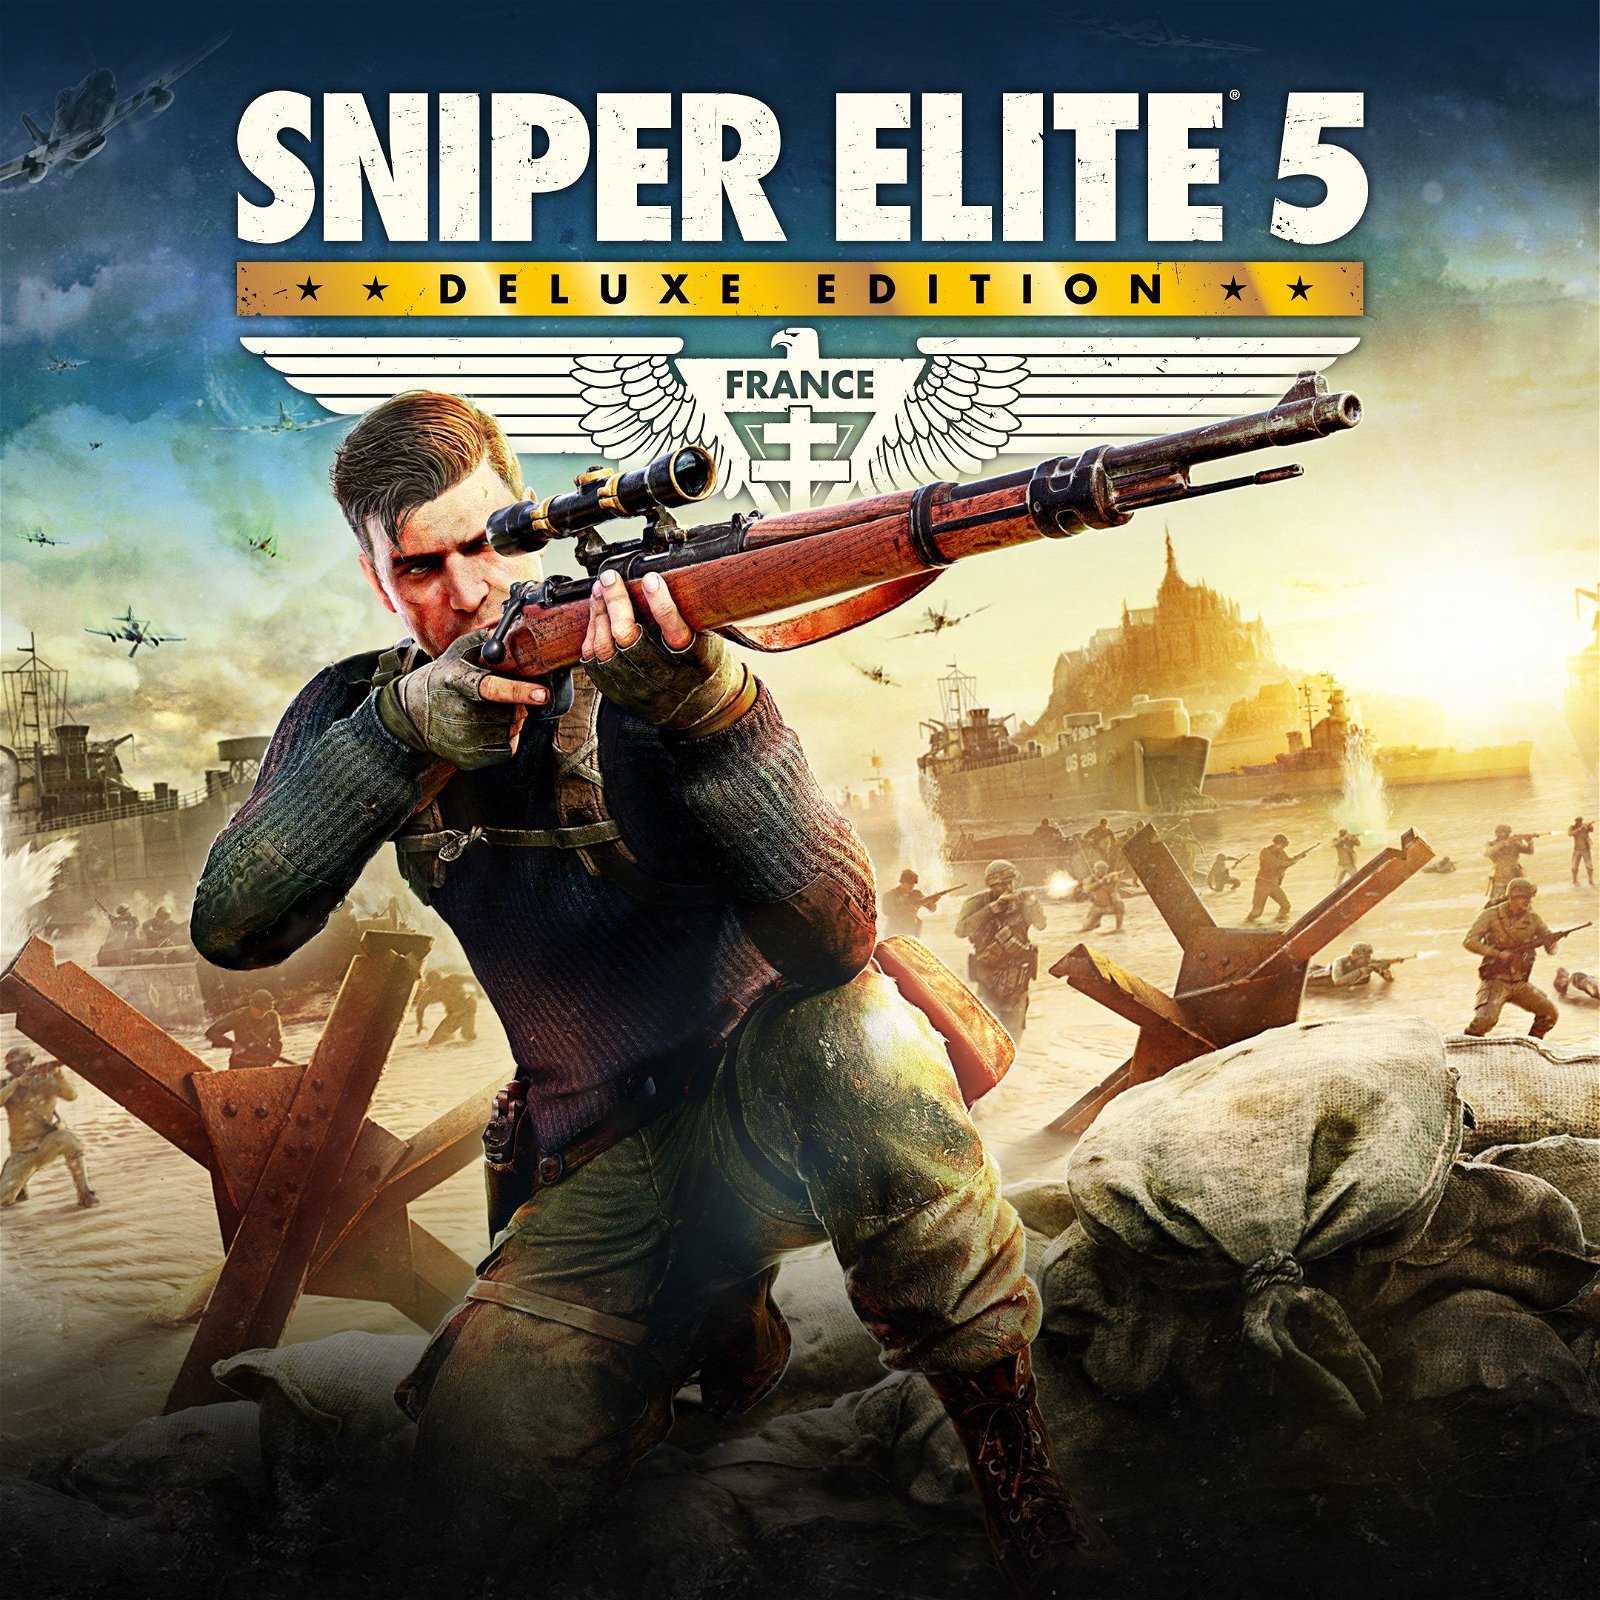 Image of Sniper Elite 5 Deluxe Edition